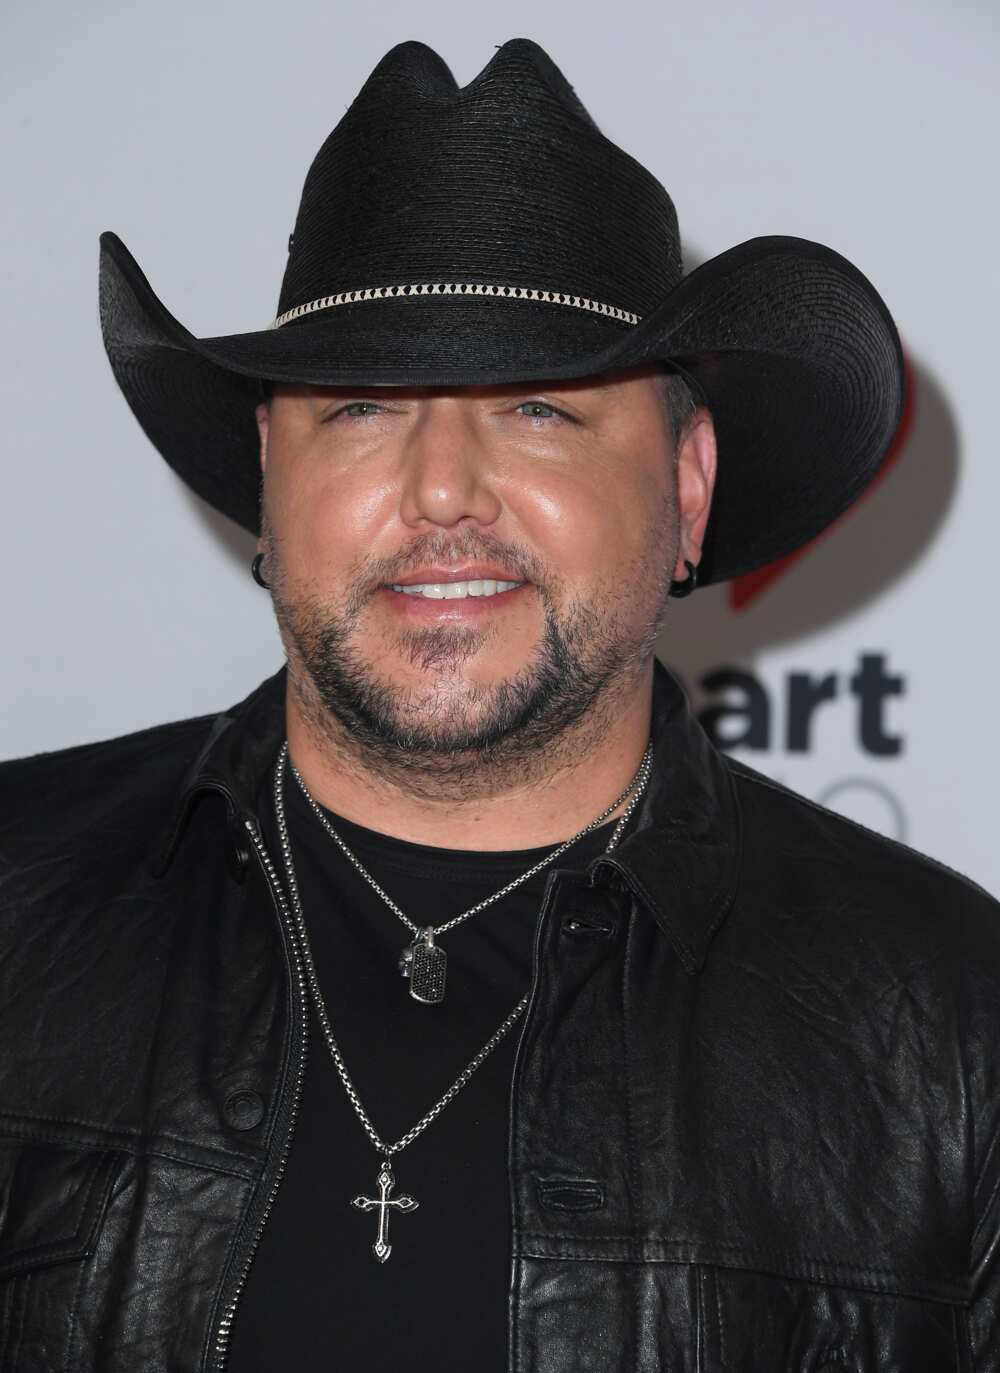 who are the most popular male country singers today?